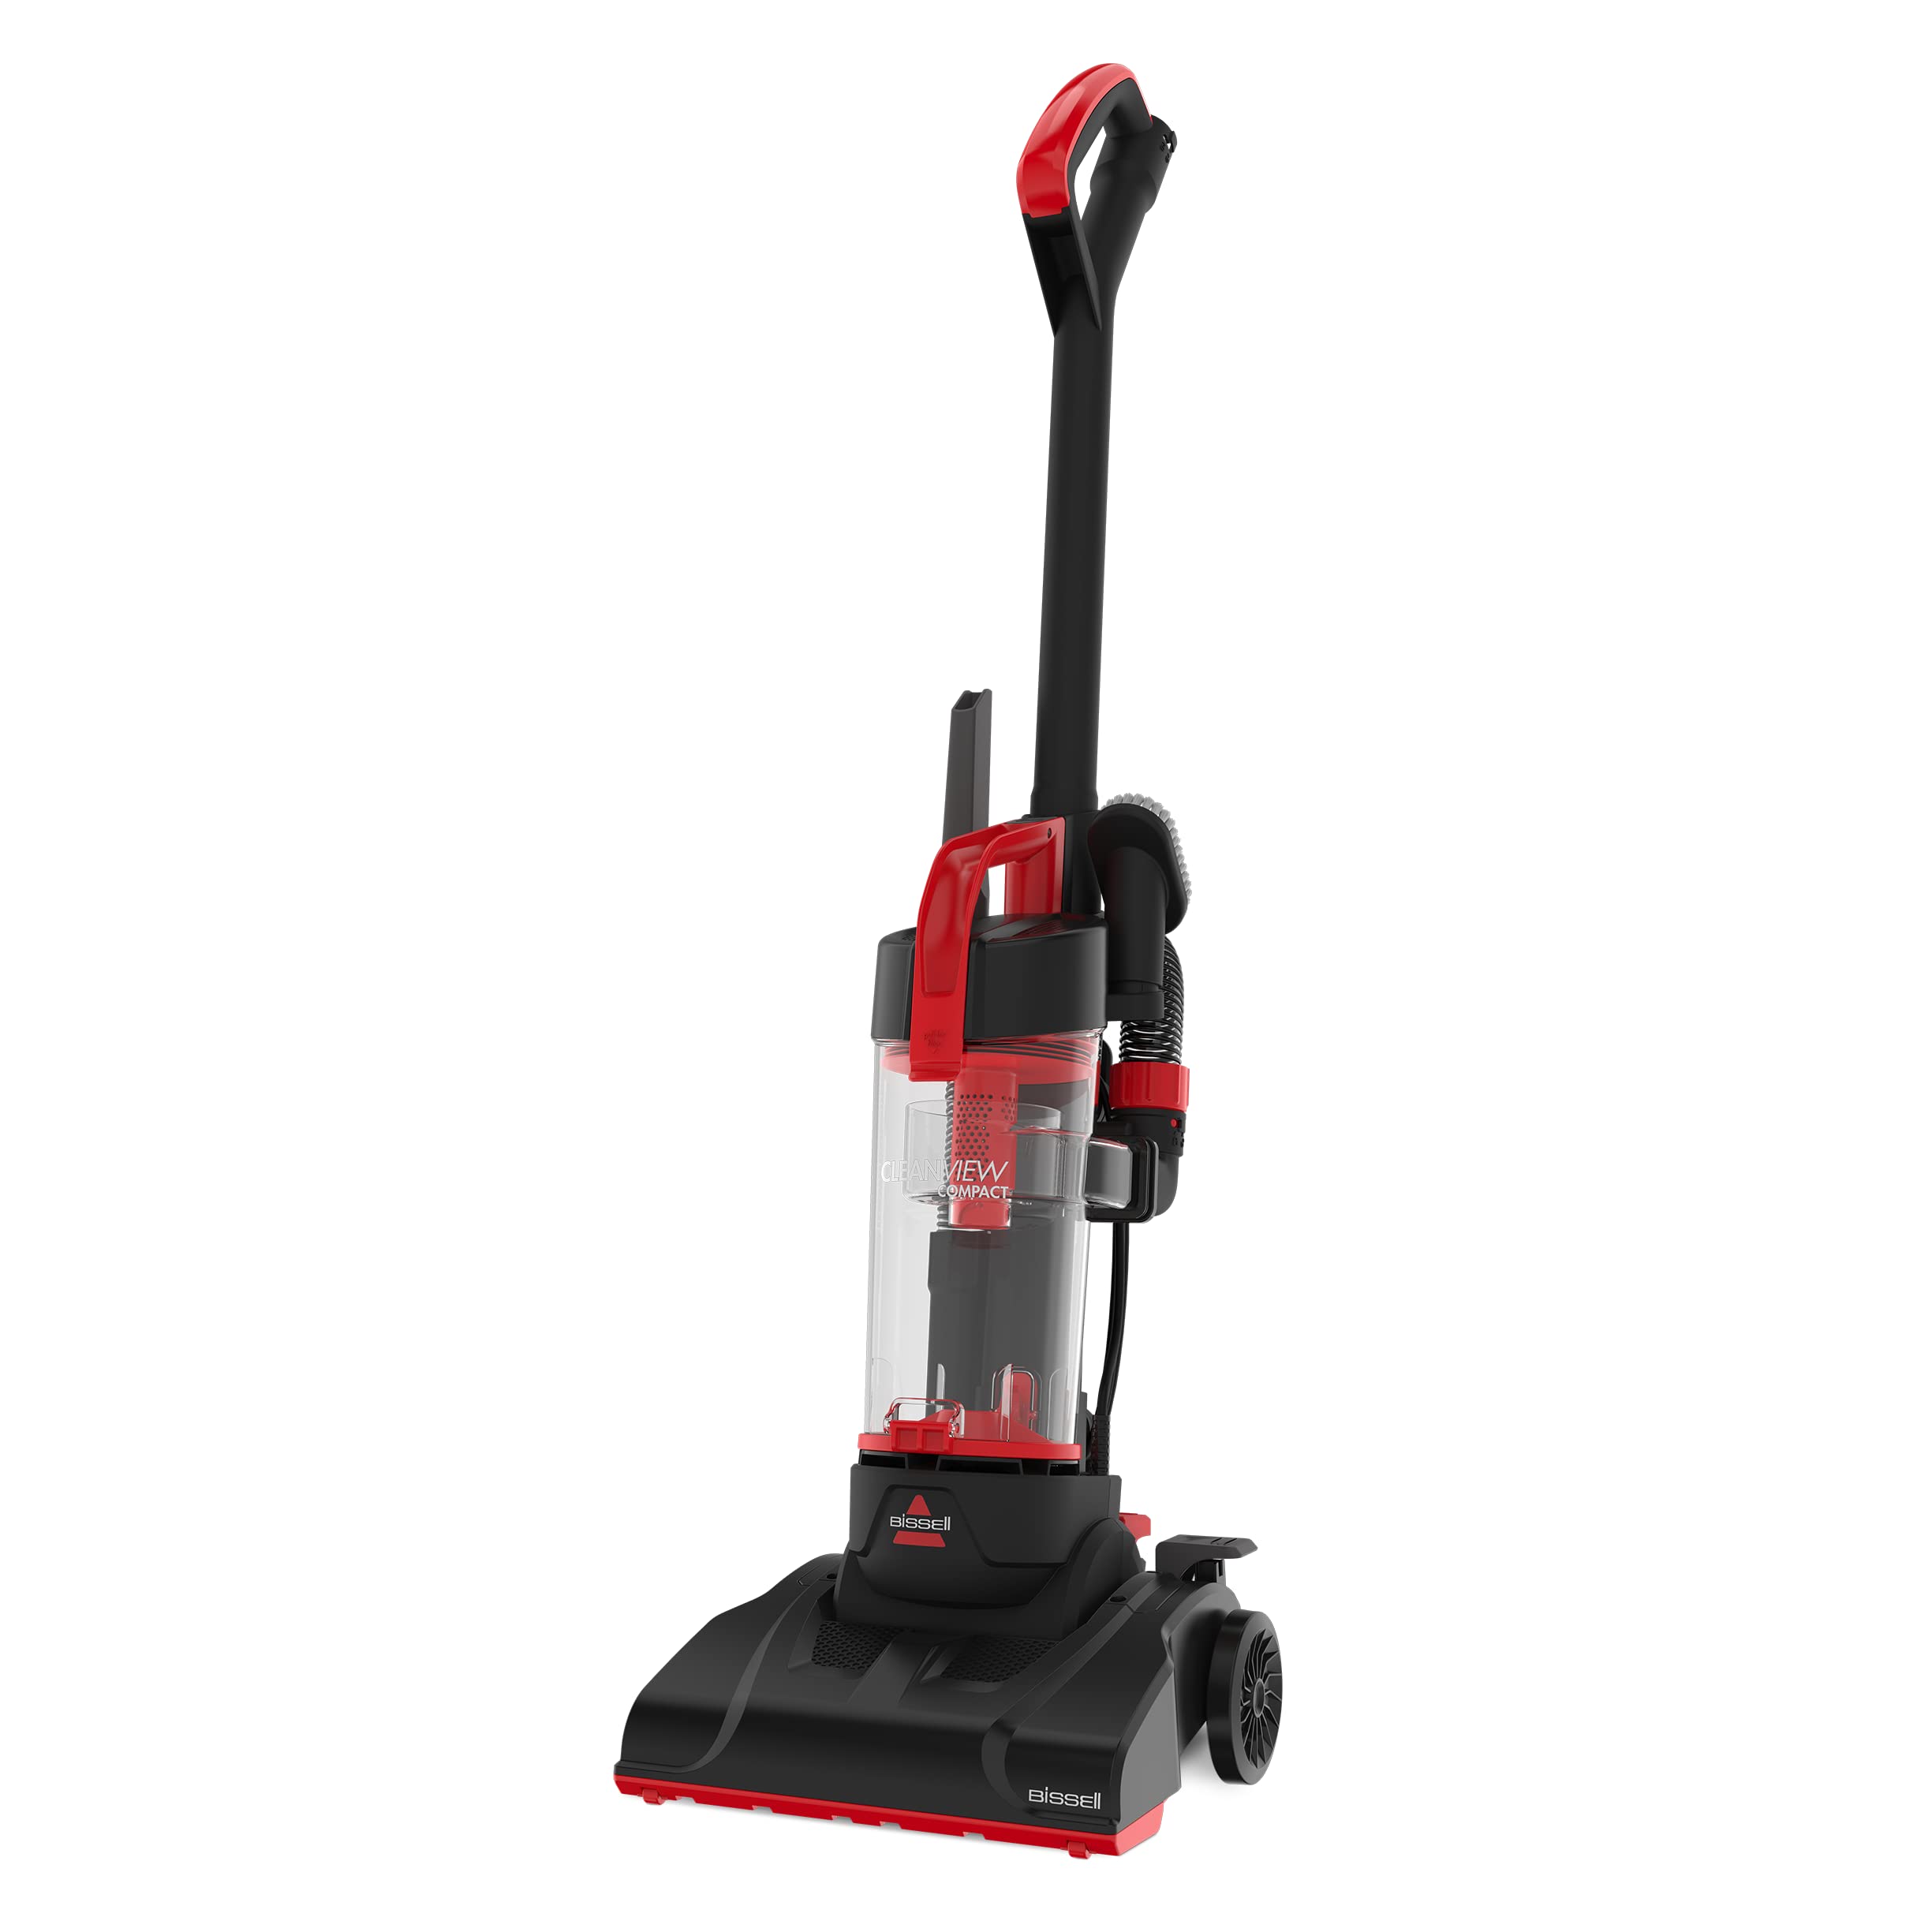 Bissell Aspirateur vertical turbo compact CleanView